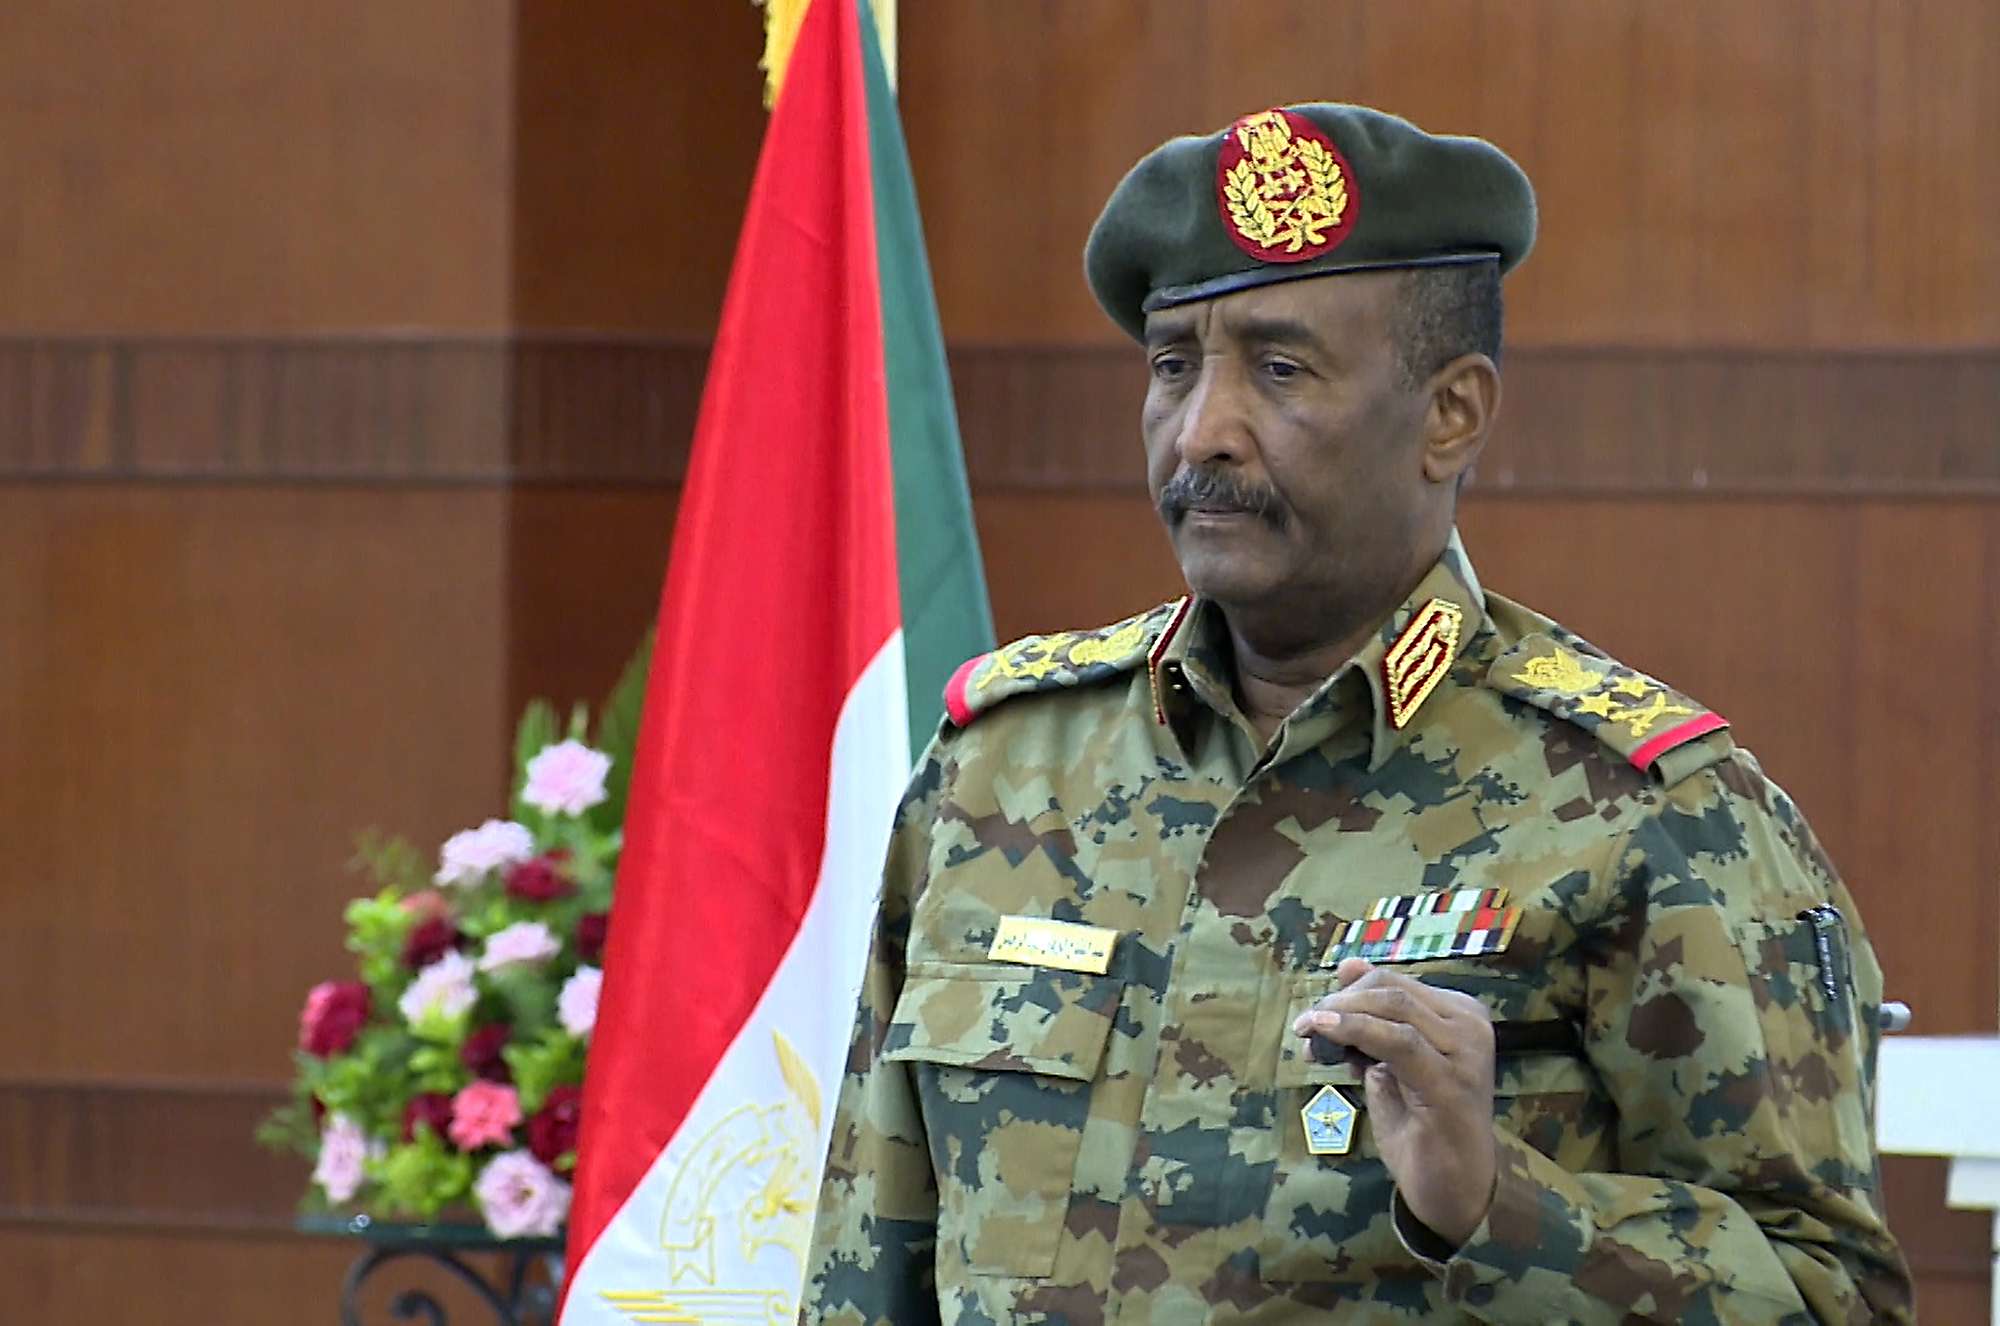 President of Sovereign Council in Sudan Announces State of Emergency, Dissolution of Council of Ministers